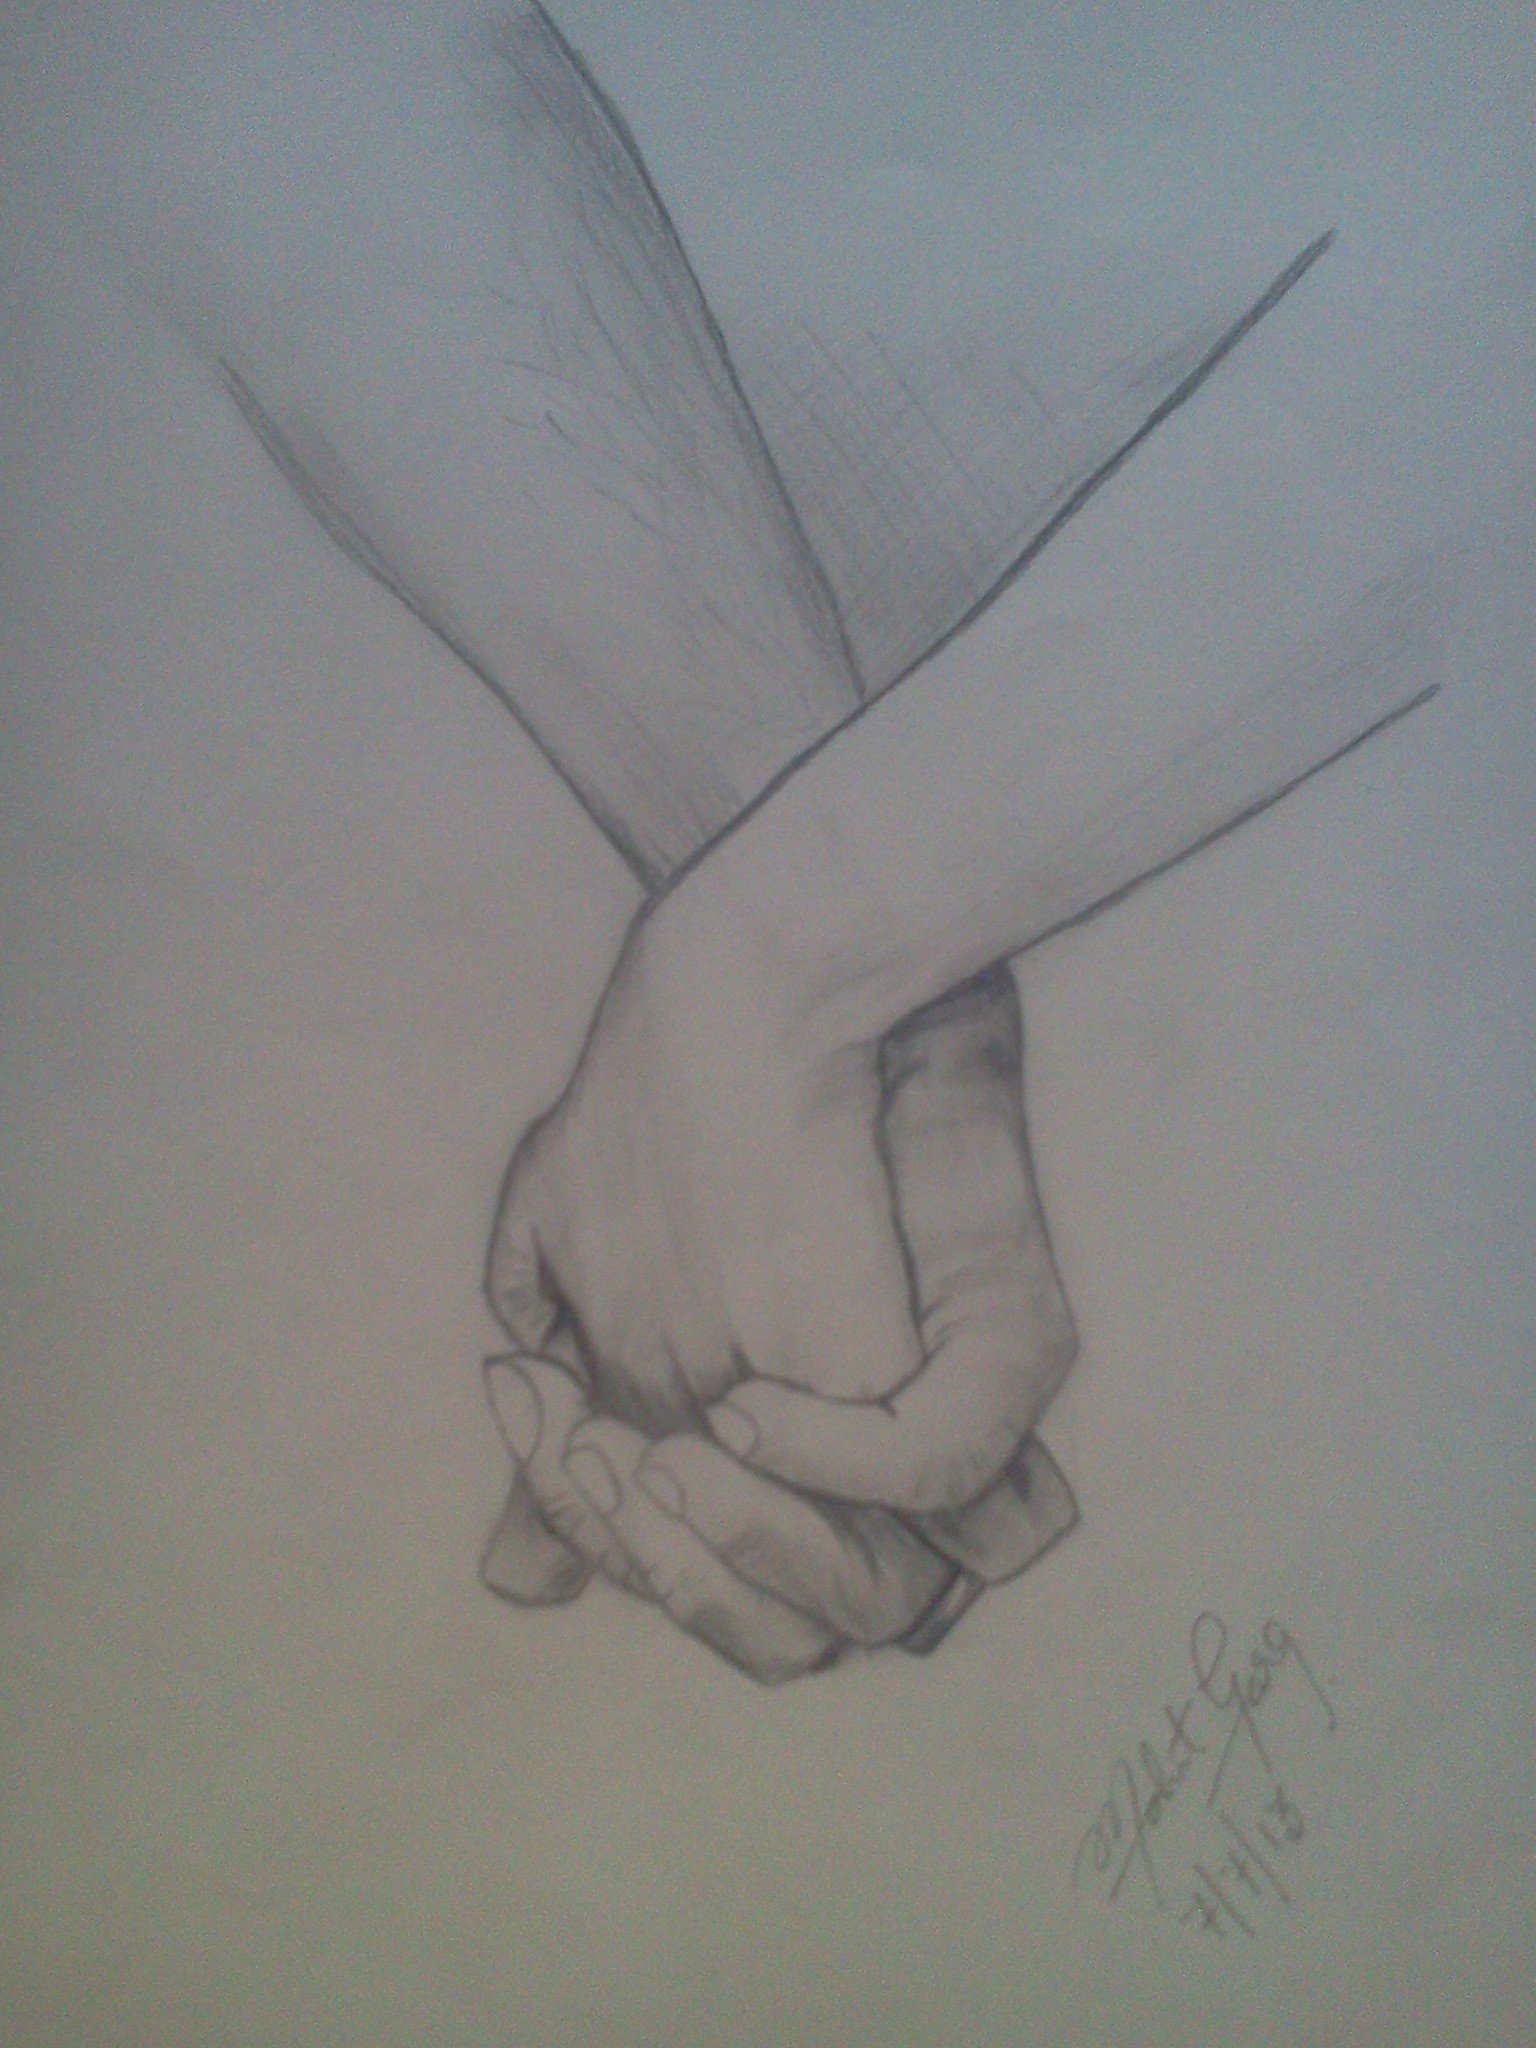  Pencil Sketches Of Love at PaintingValley.com Explore collection of 